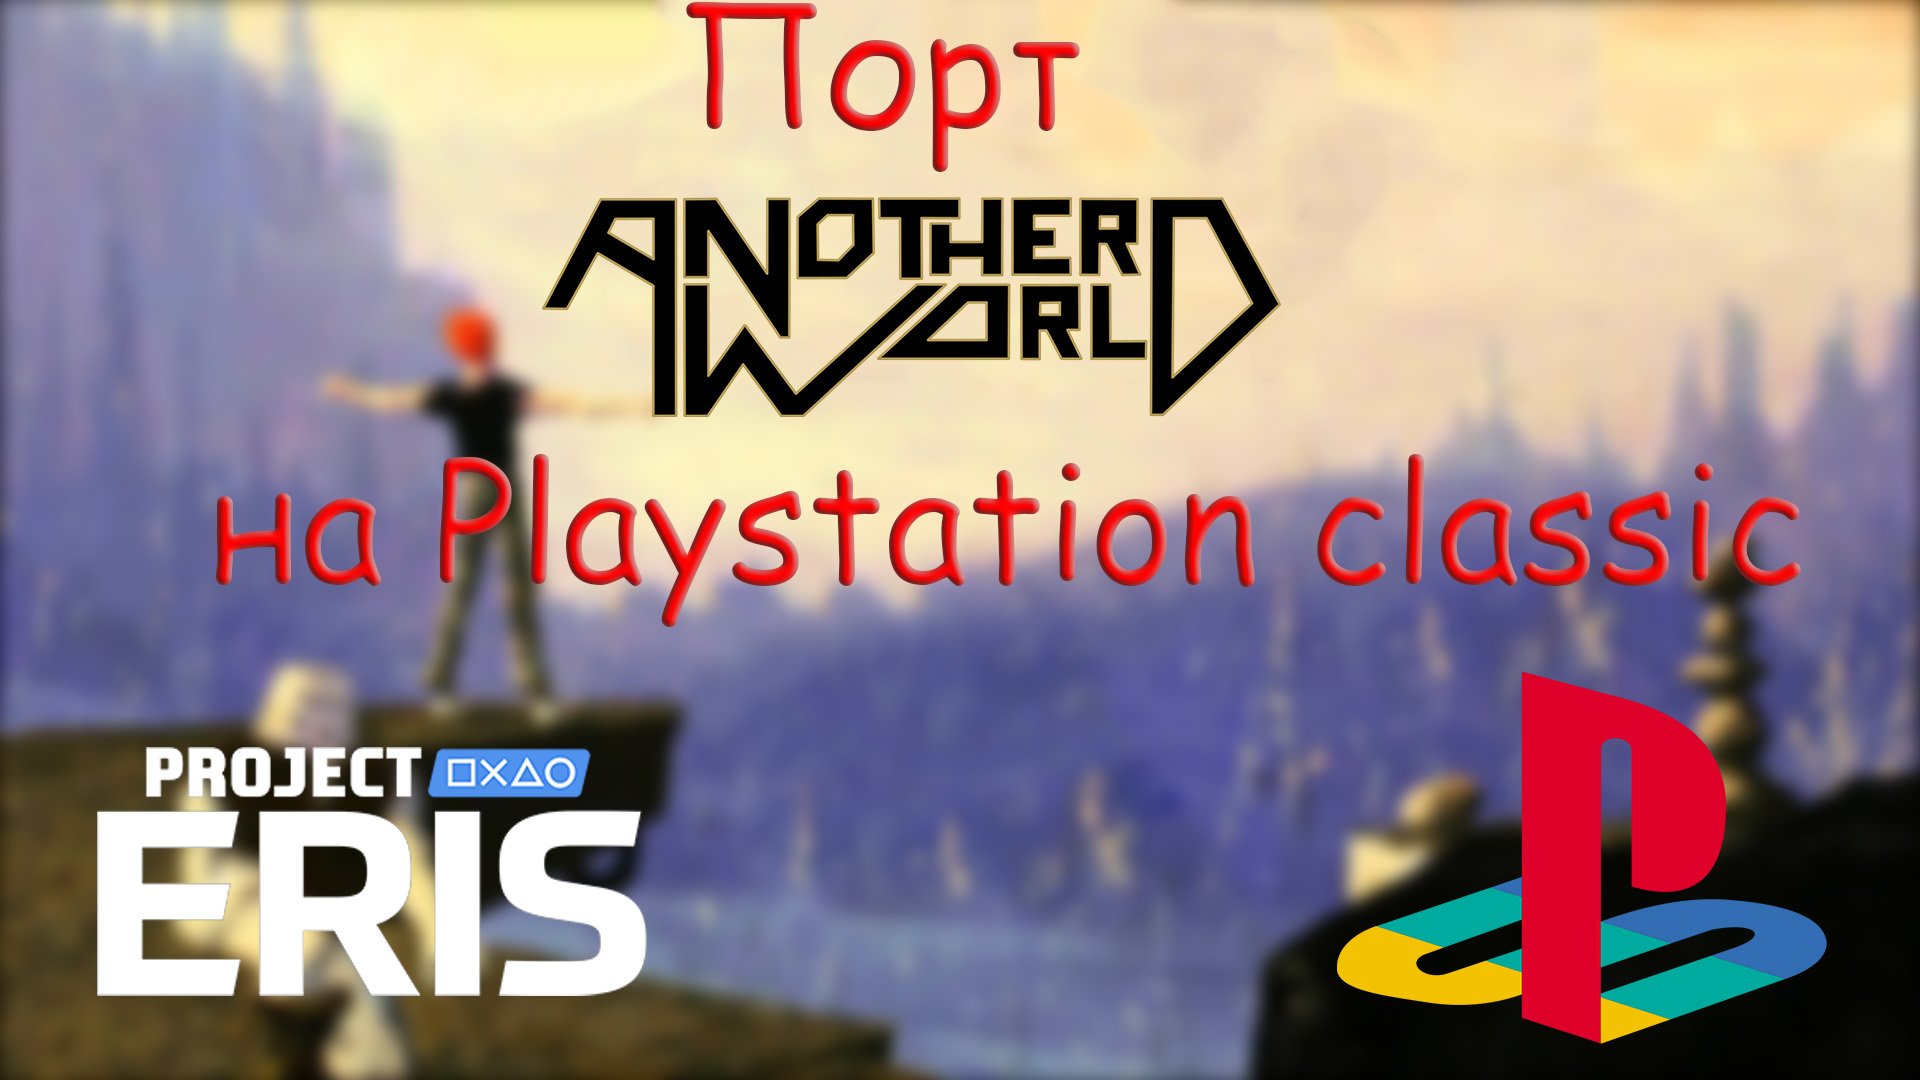 Порт Another world на Playstation classic